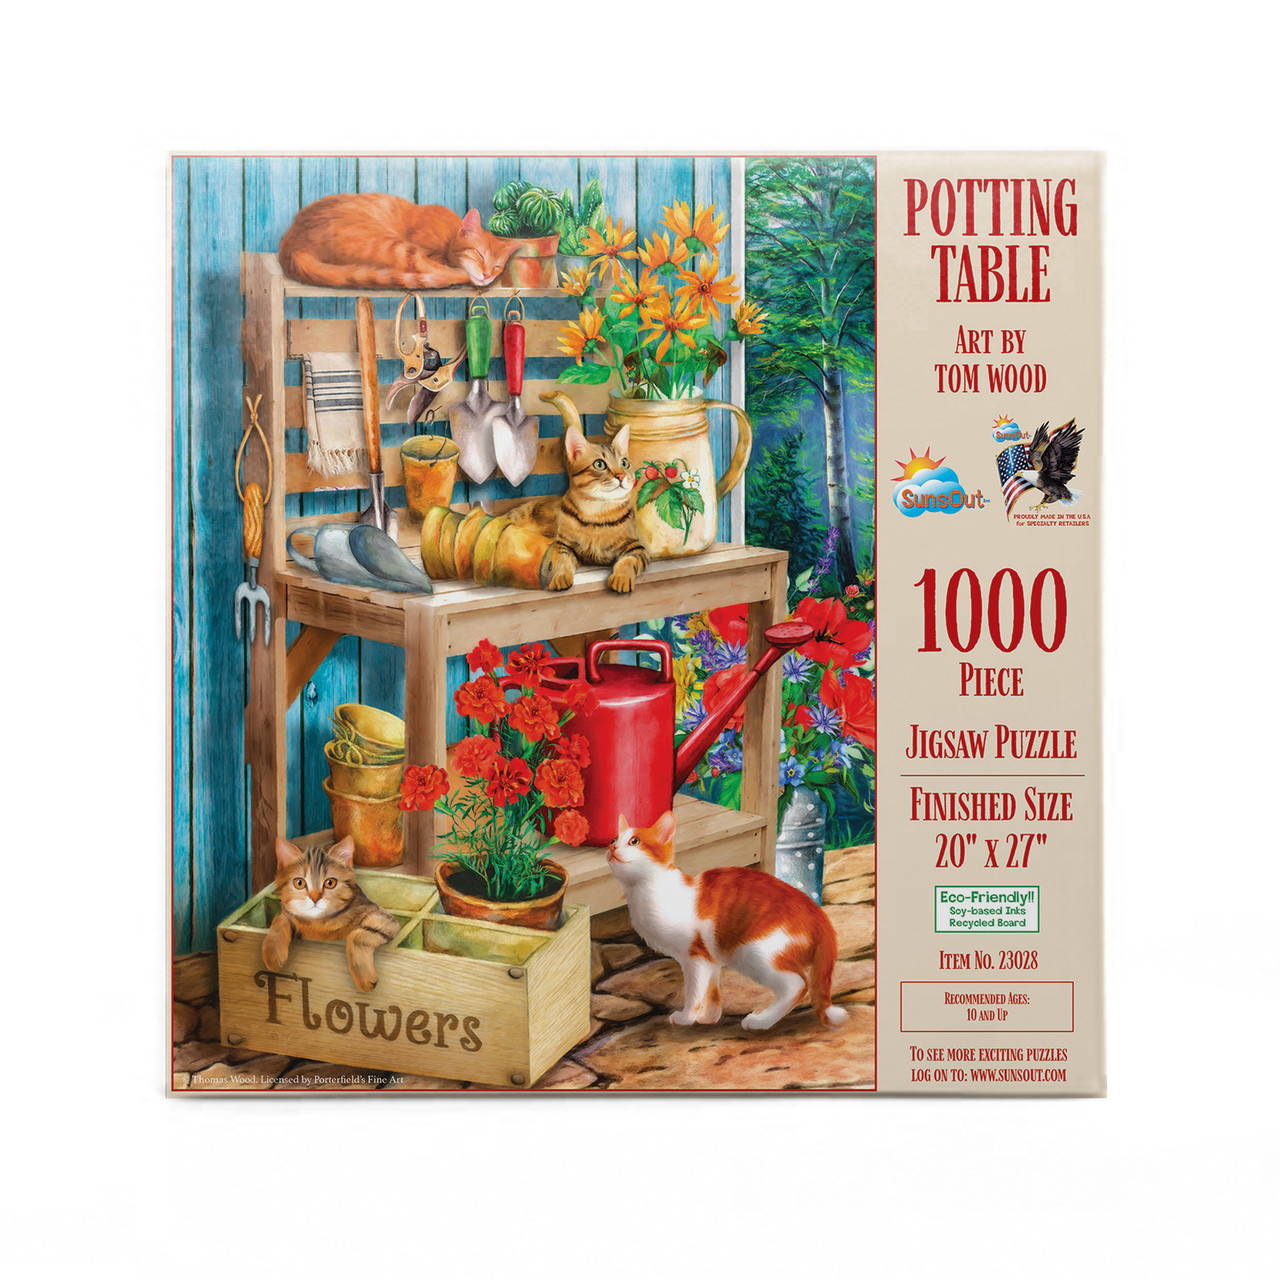 SUNSOUT INC - Potting Table - 1000 pc Jigsaw Puzzle by Artist: Tom Wood -  Finished Size 20 x 27 - MPN# 23028 - Jigsaw Express